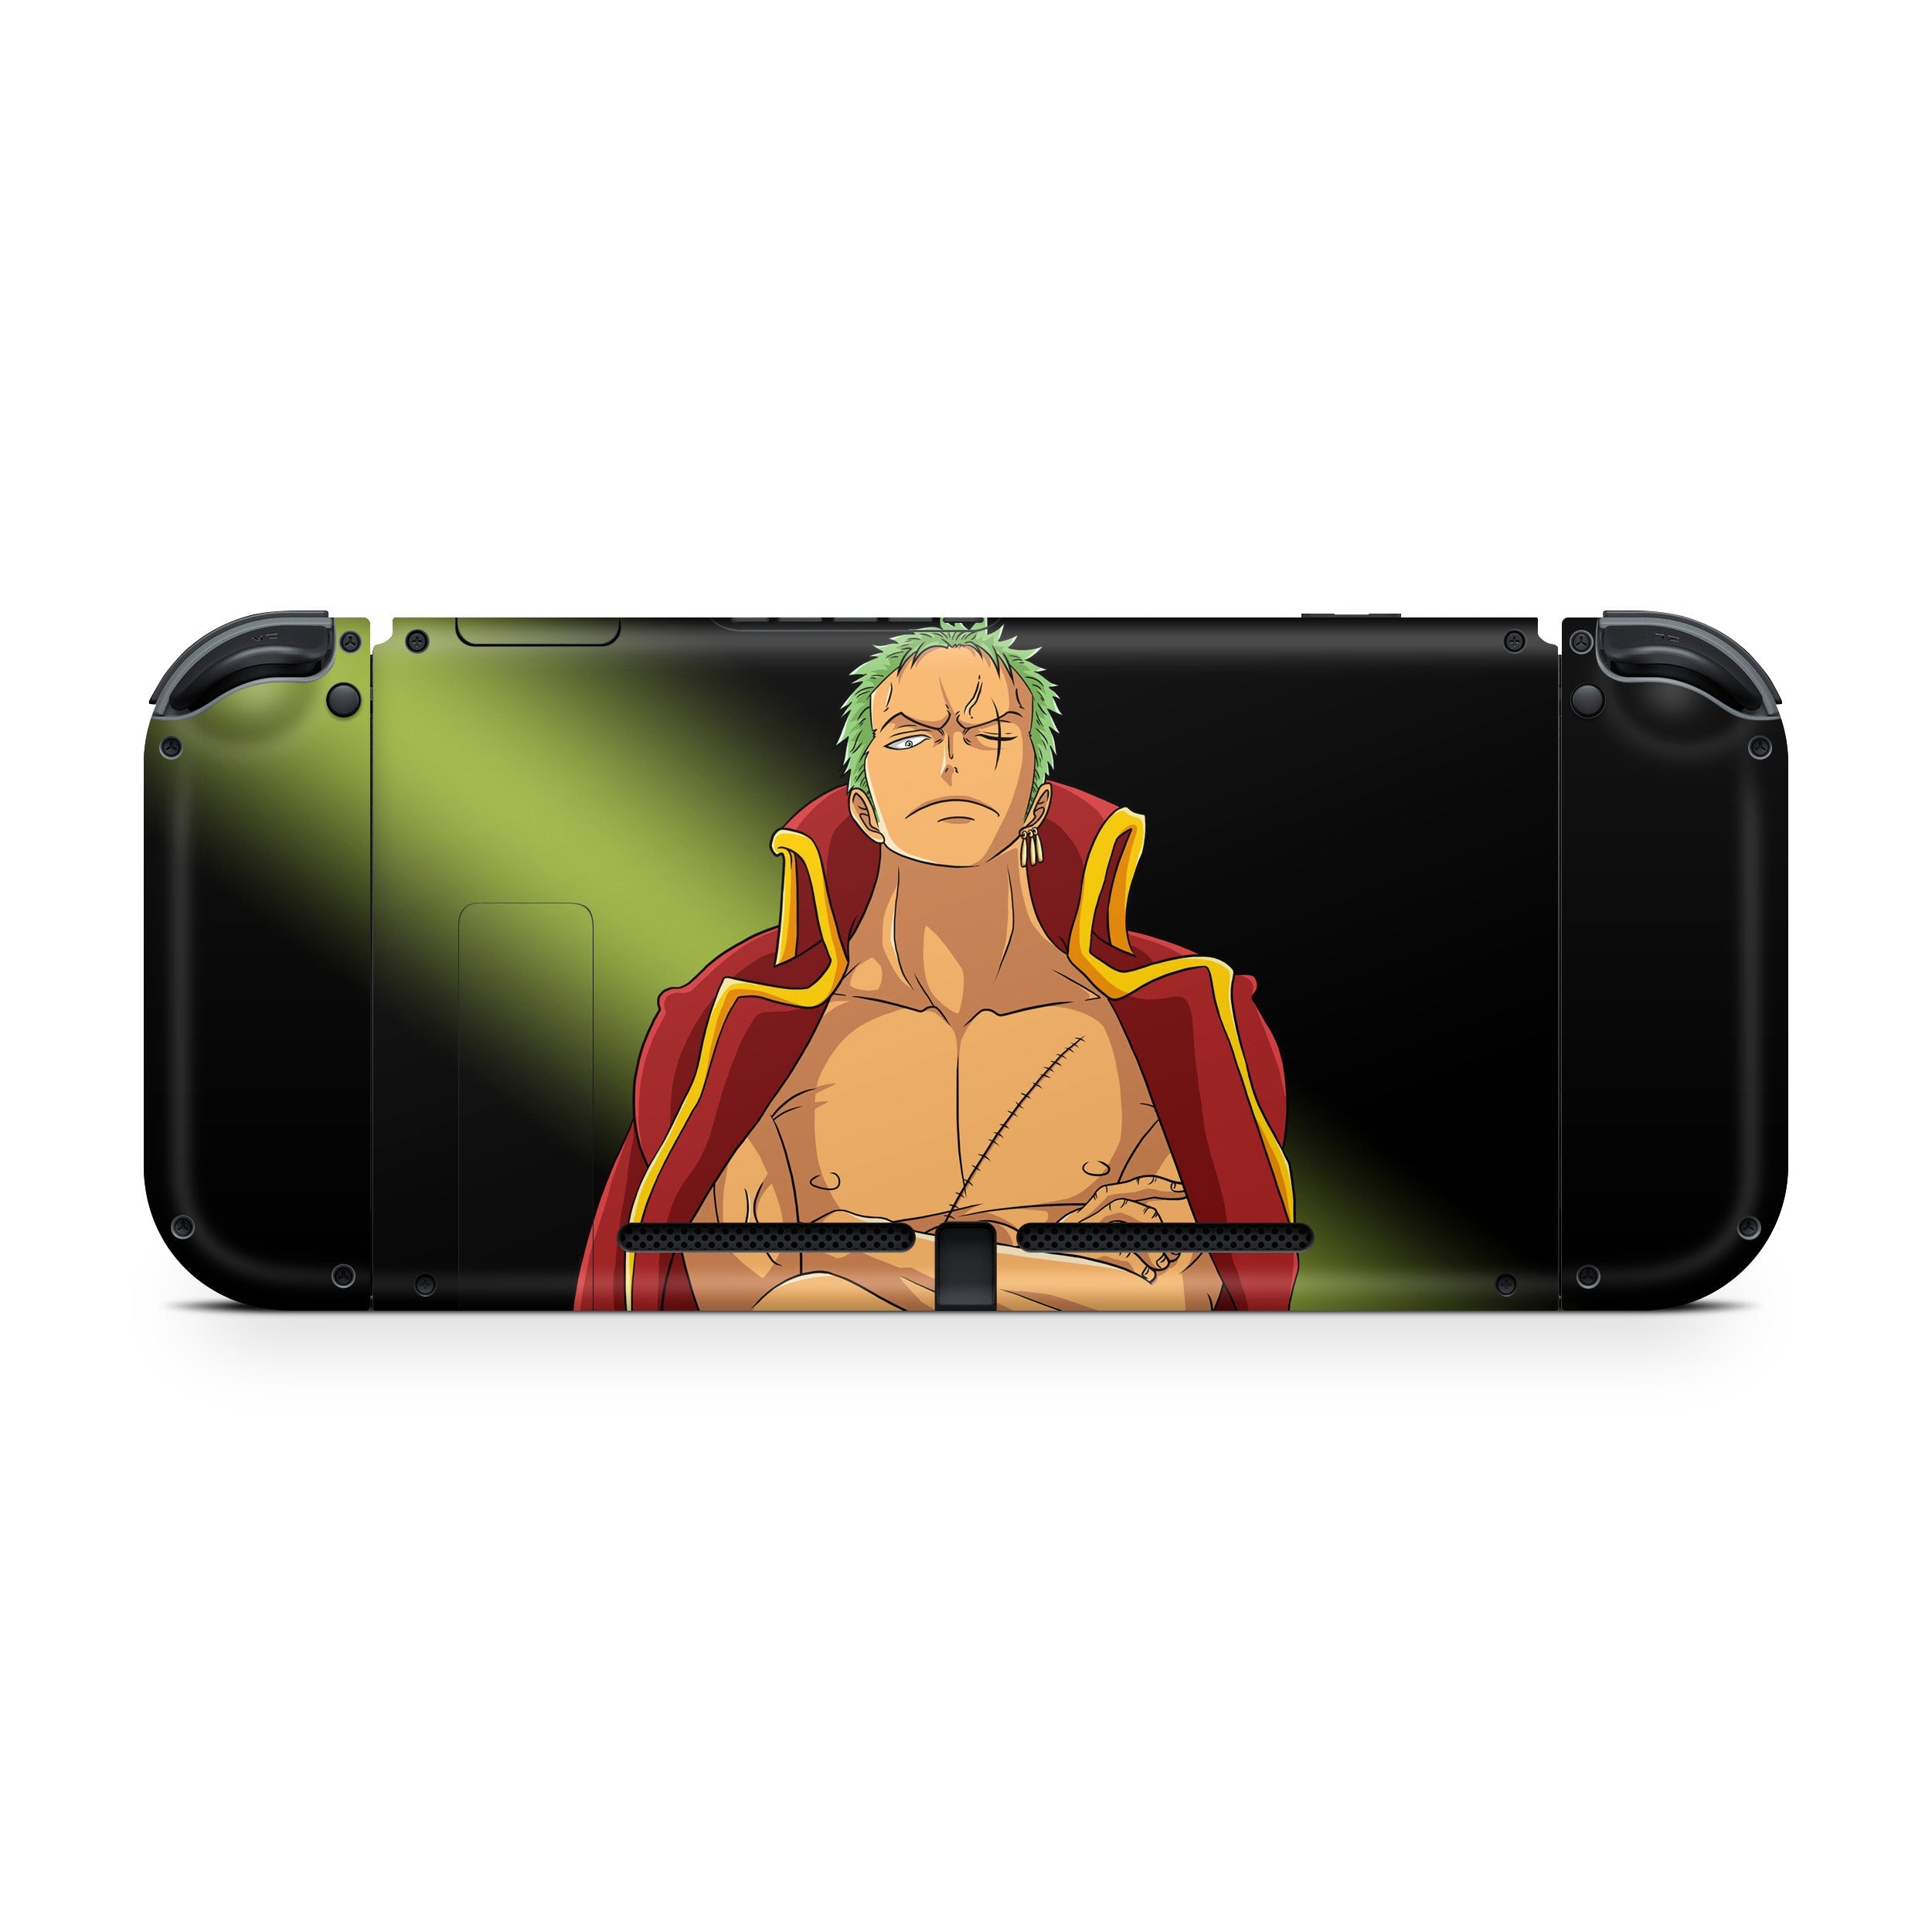 A video game skin featuring a One Piece Zoro Roronoa design for the Nintendo Switch.